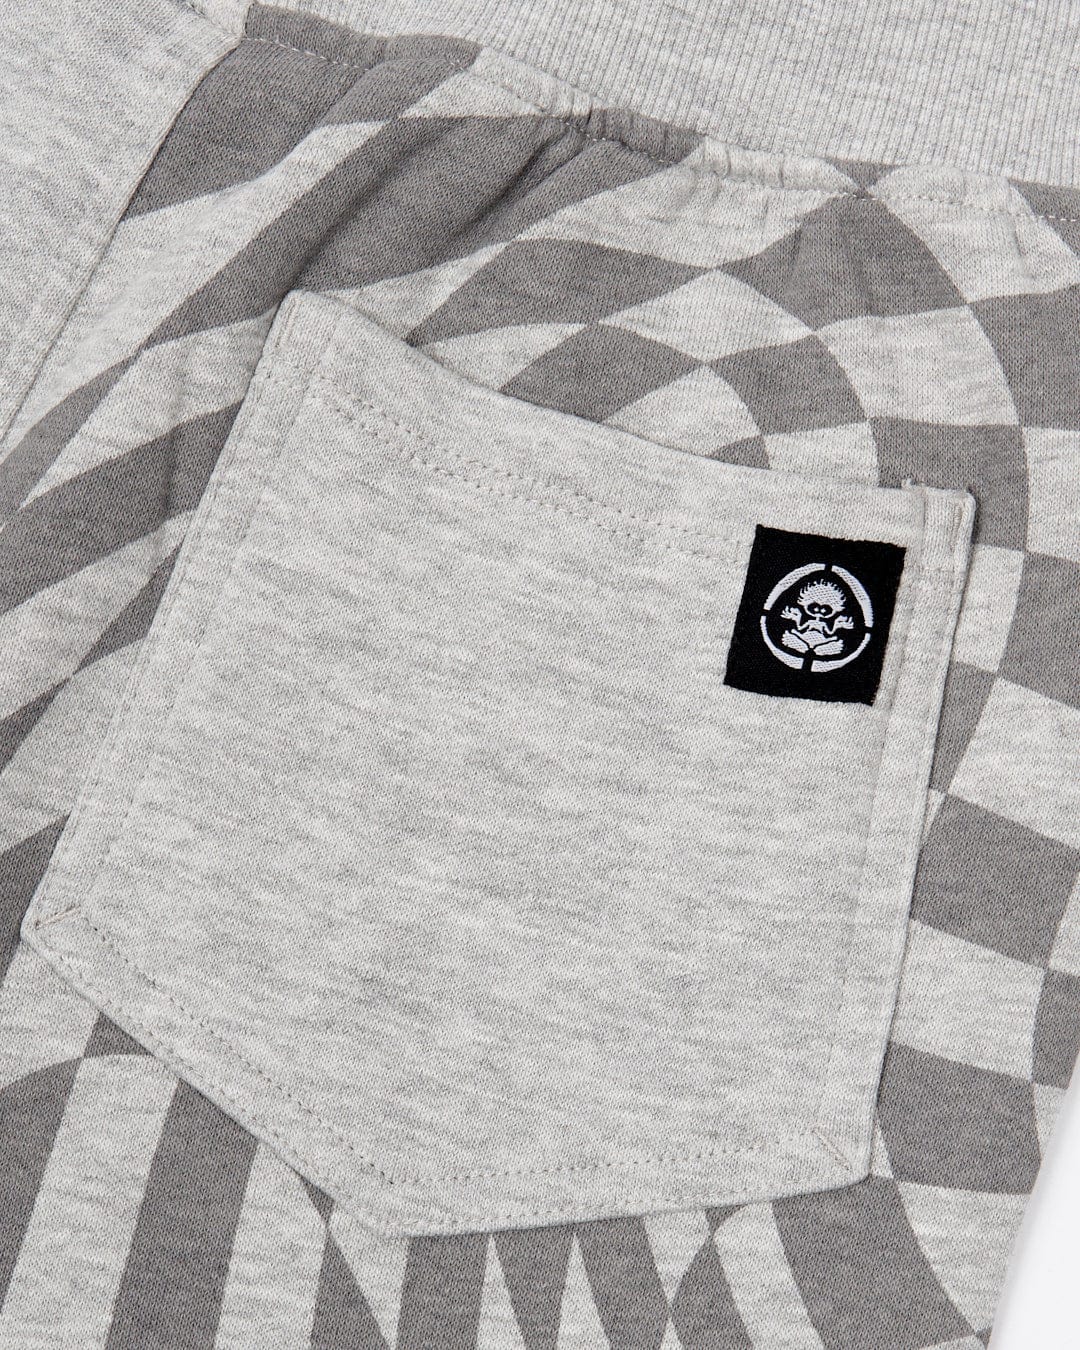 A Rip It - Kids Jogging Bottom - Grey with a Saltrock logo on the pocket.